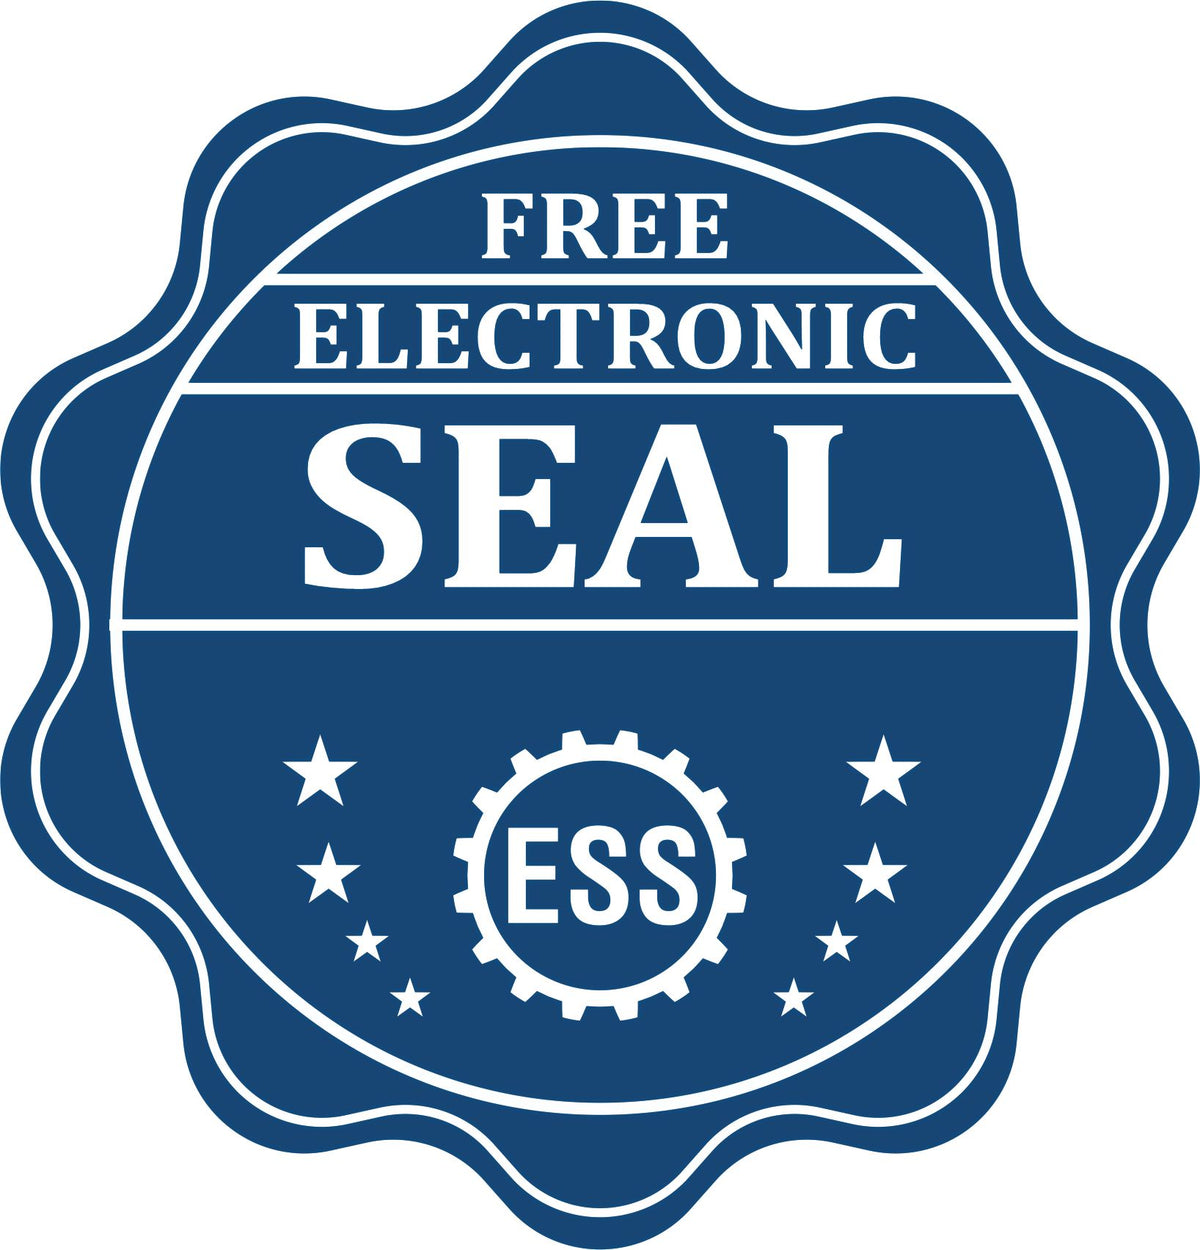 A badge showing a free electronic seal for the Slim Pre-Inked Florida Architect Seal Stamp with stars and the ESS gear on the emblem.